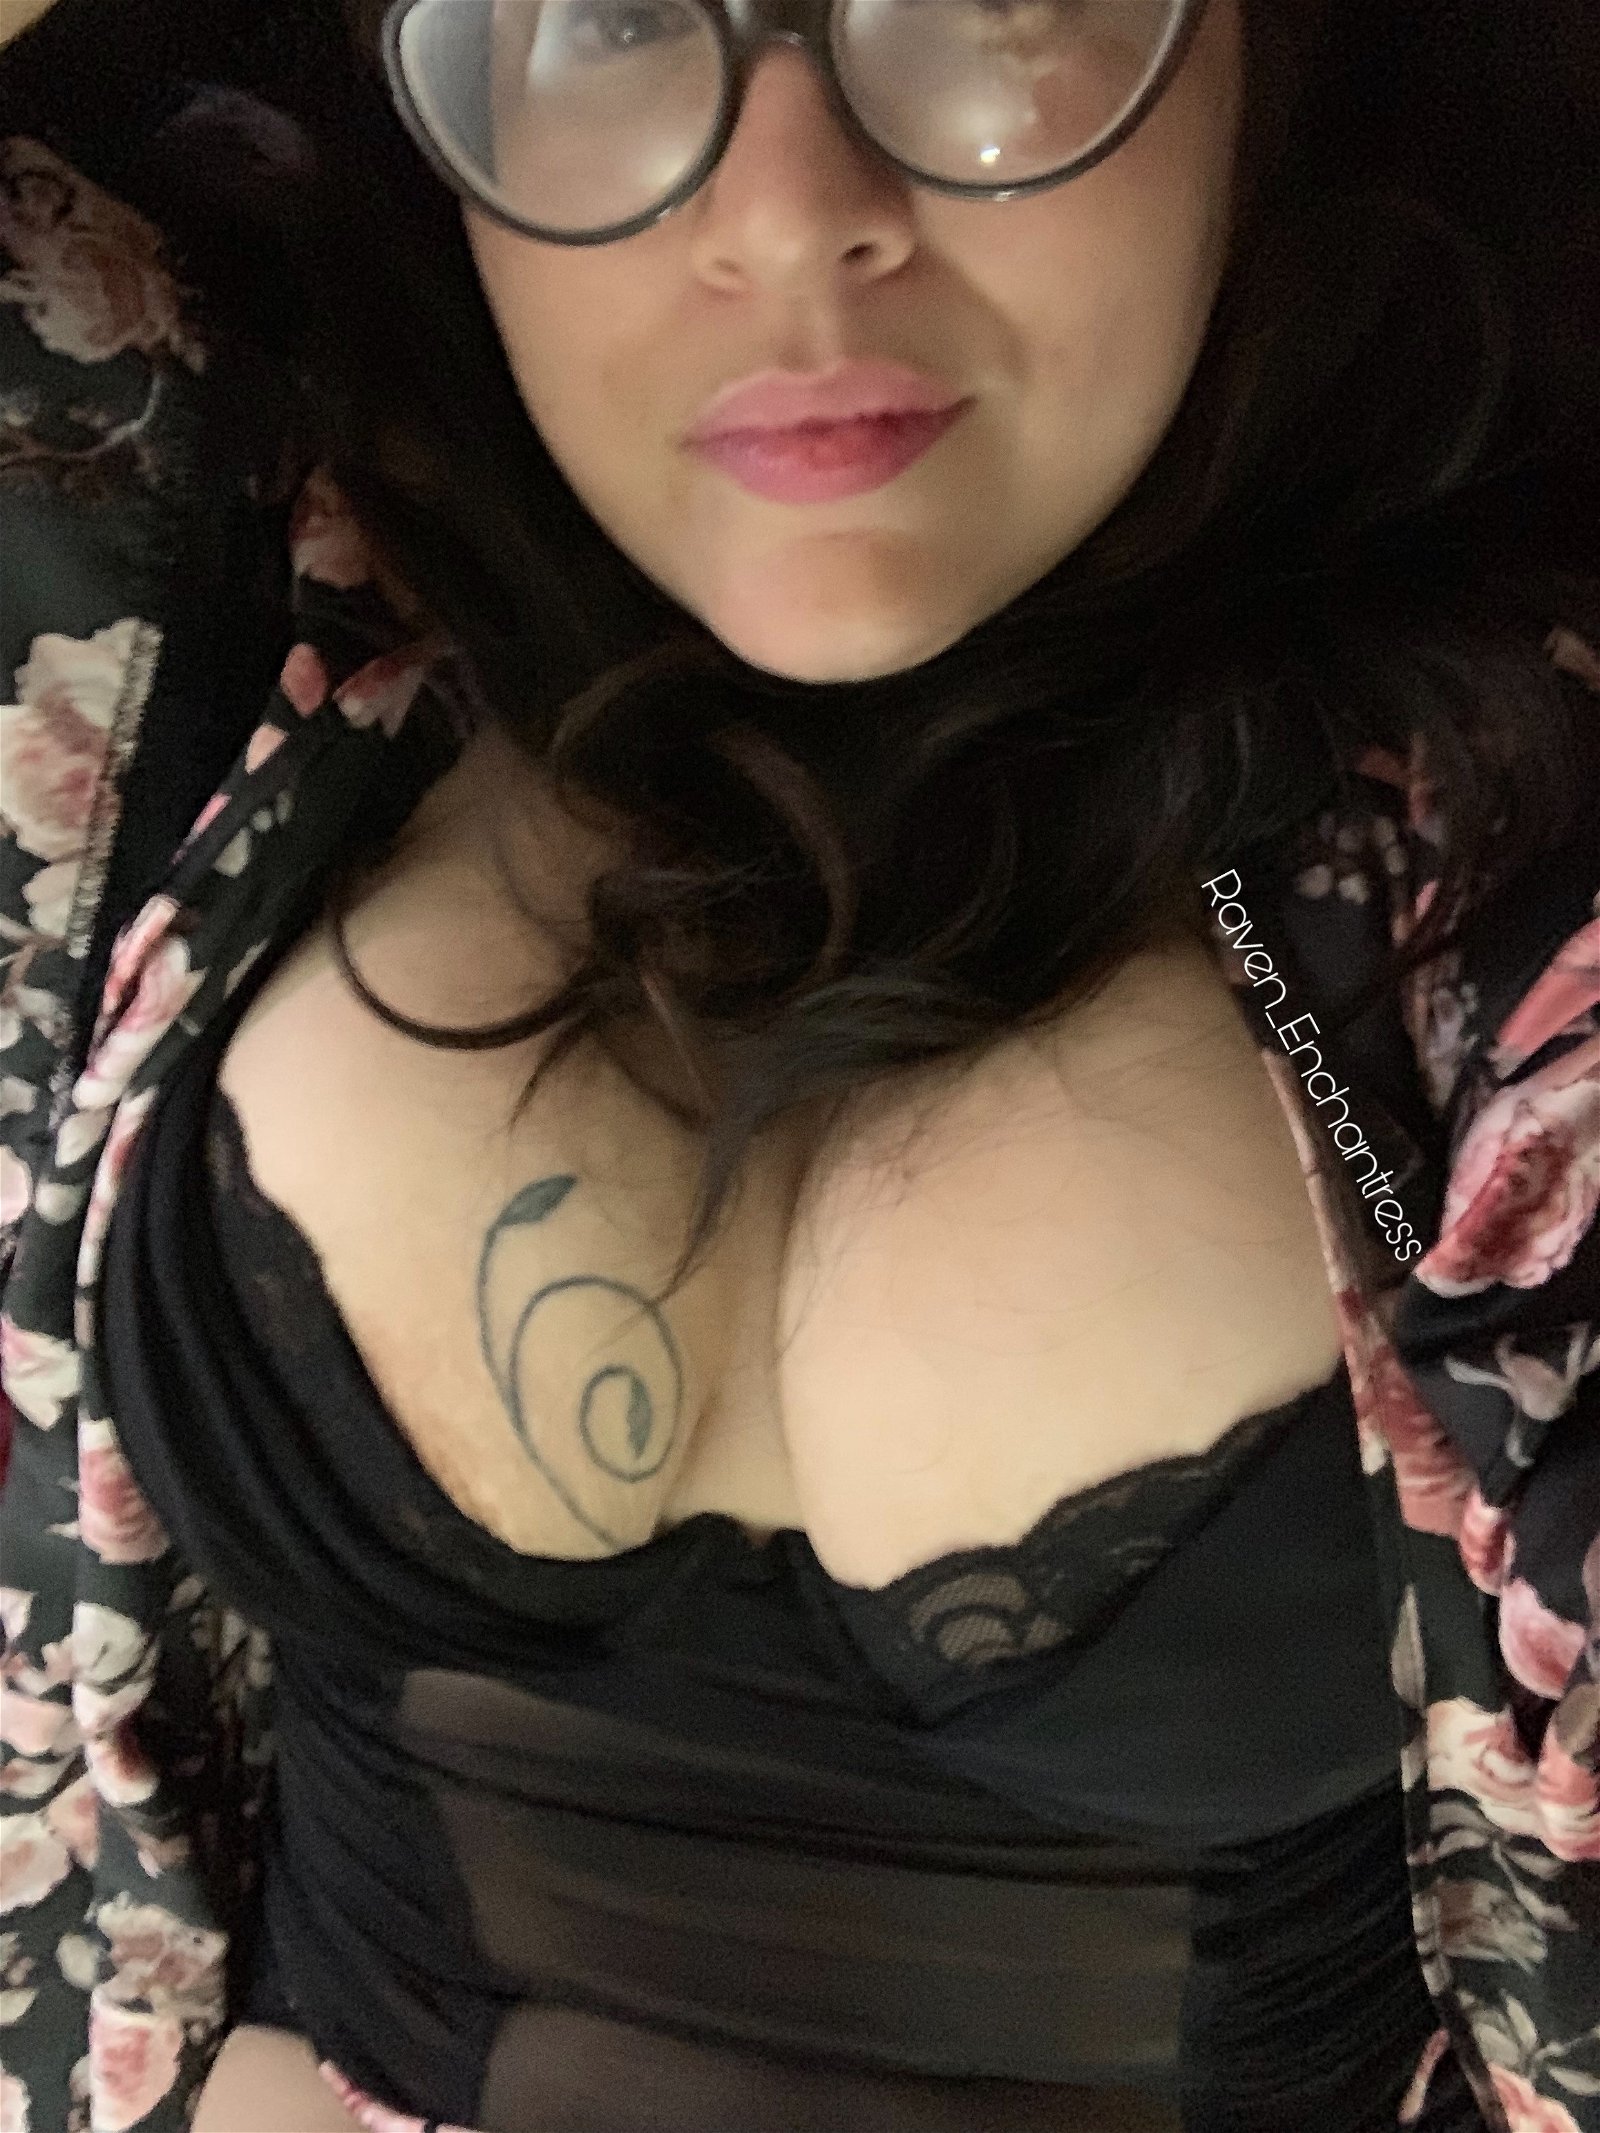 Watch the Photo by Raven_Enchantress with the username @curvyraven, who is a star user, posted on March 12, 2020 and the text says 'I wonder if your girlfriend would be jealous if she knew you jerk your cock to me?

#girlfriend #busty #sexyselfie #selfie #manyvids #streamatemodel #model #webcamgirl 

https://raven_enchantress.manyvids.com/'